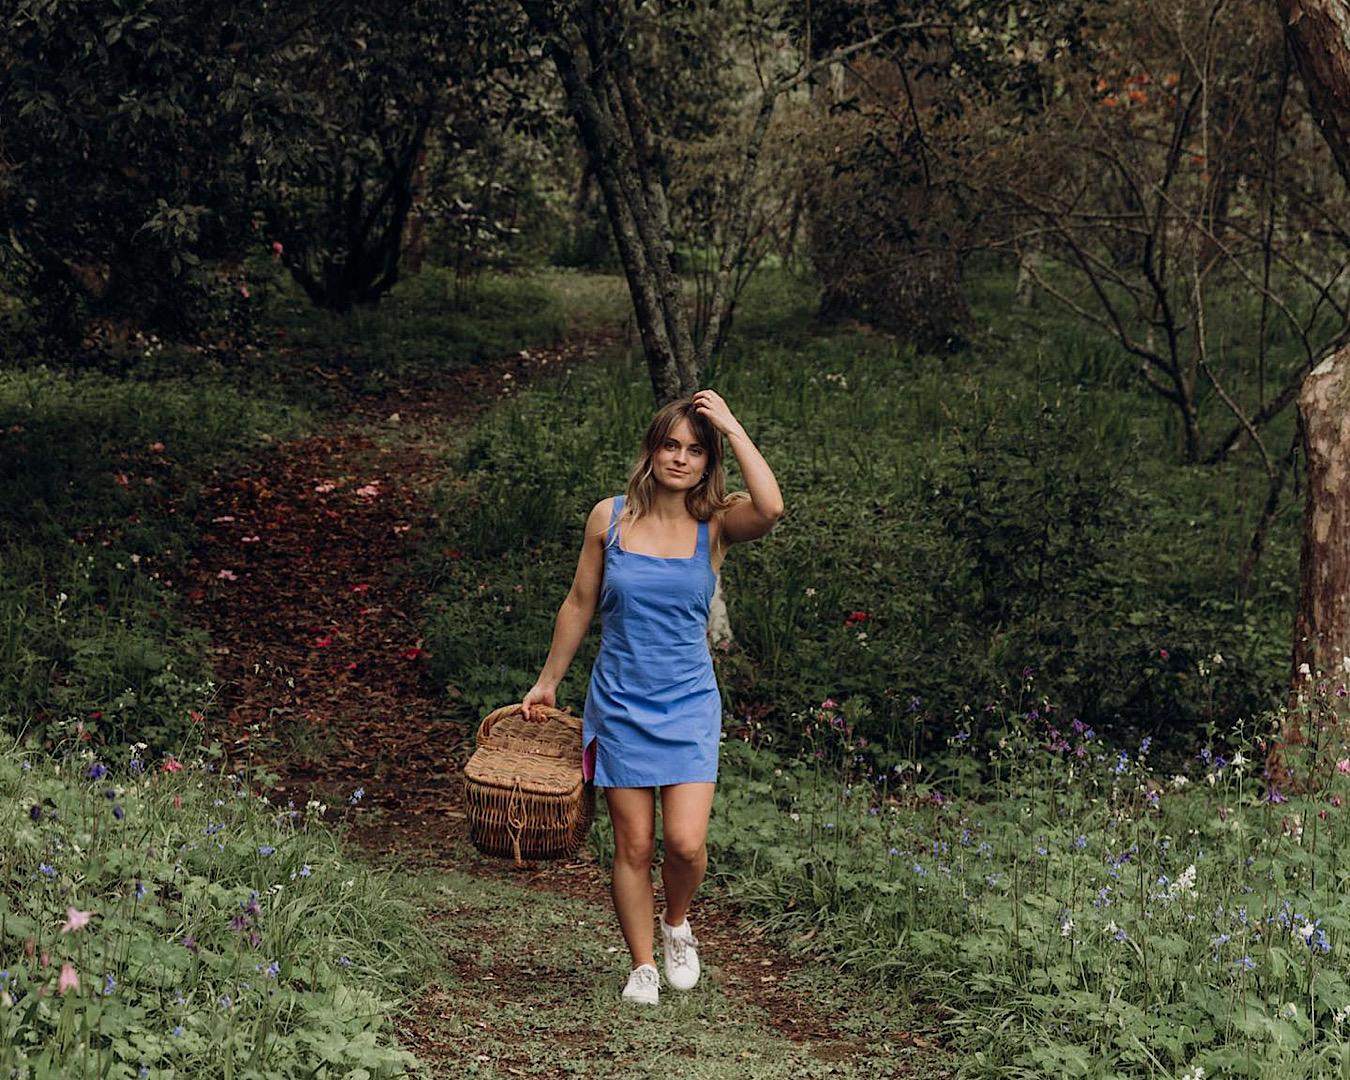 A woman in a reversible cornflower blue-pink dress walks through a forest carrying a picnic basket. 